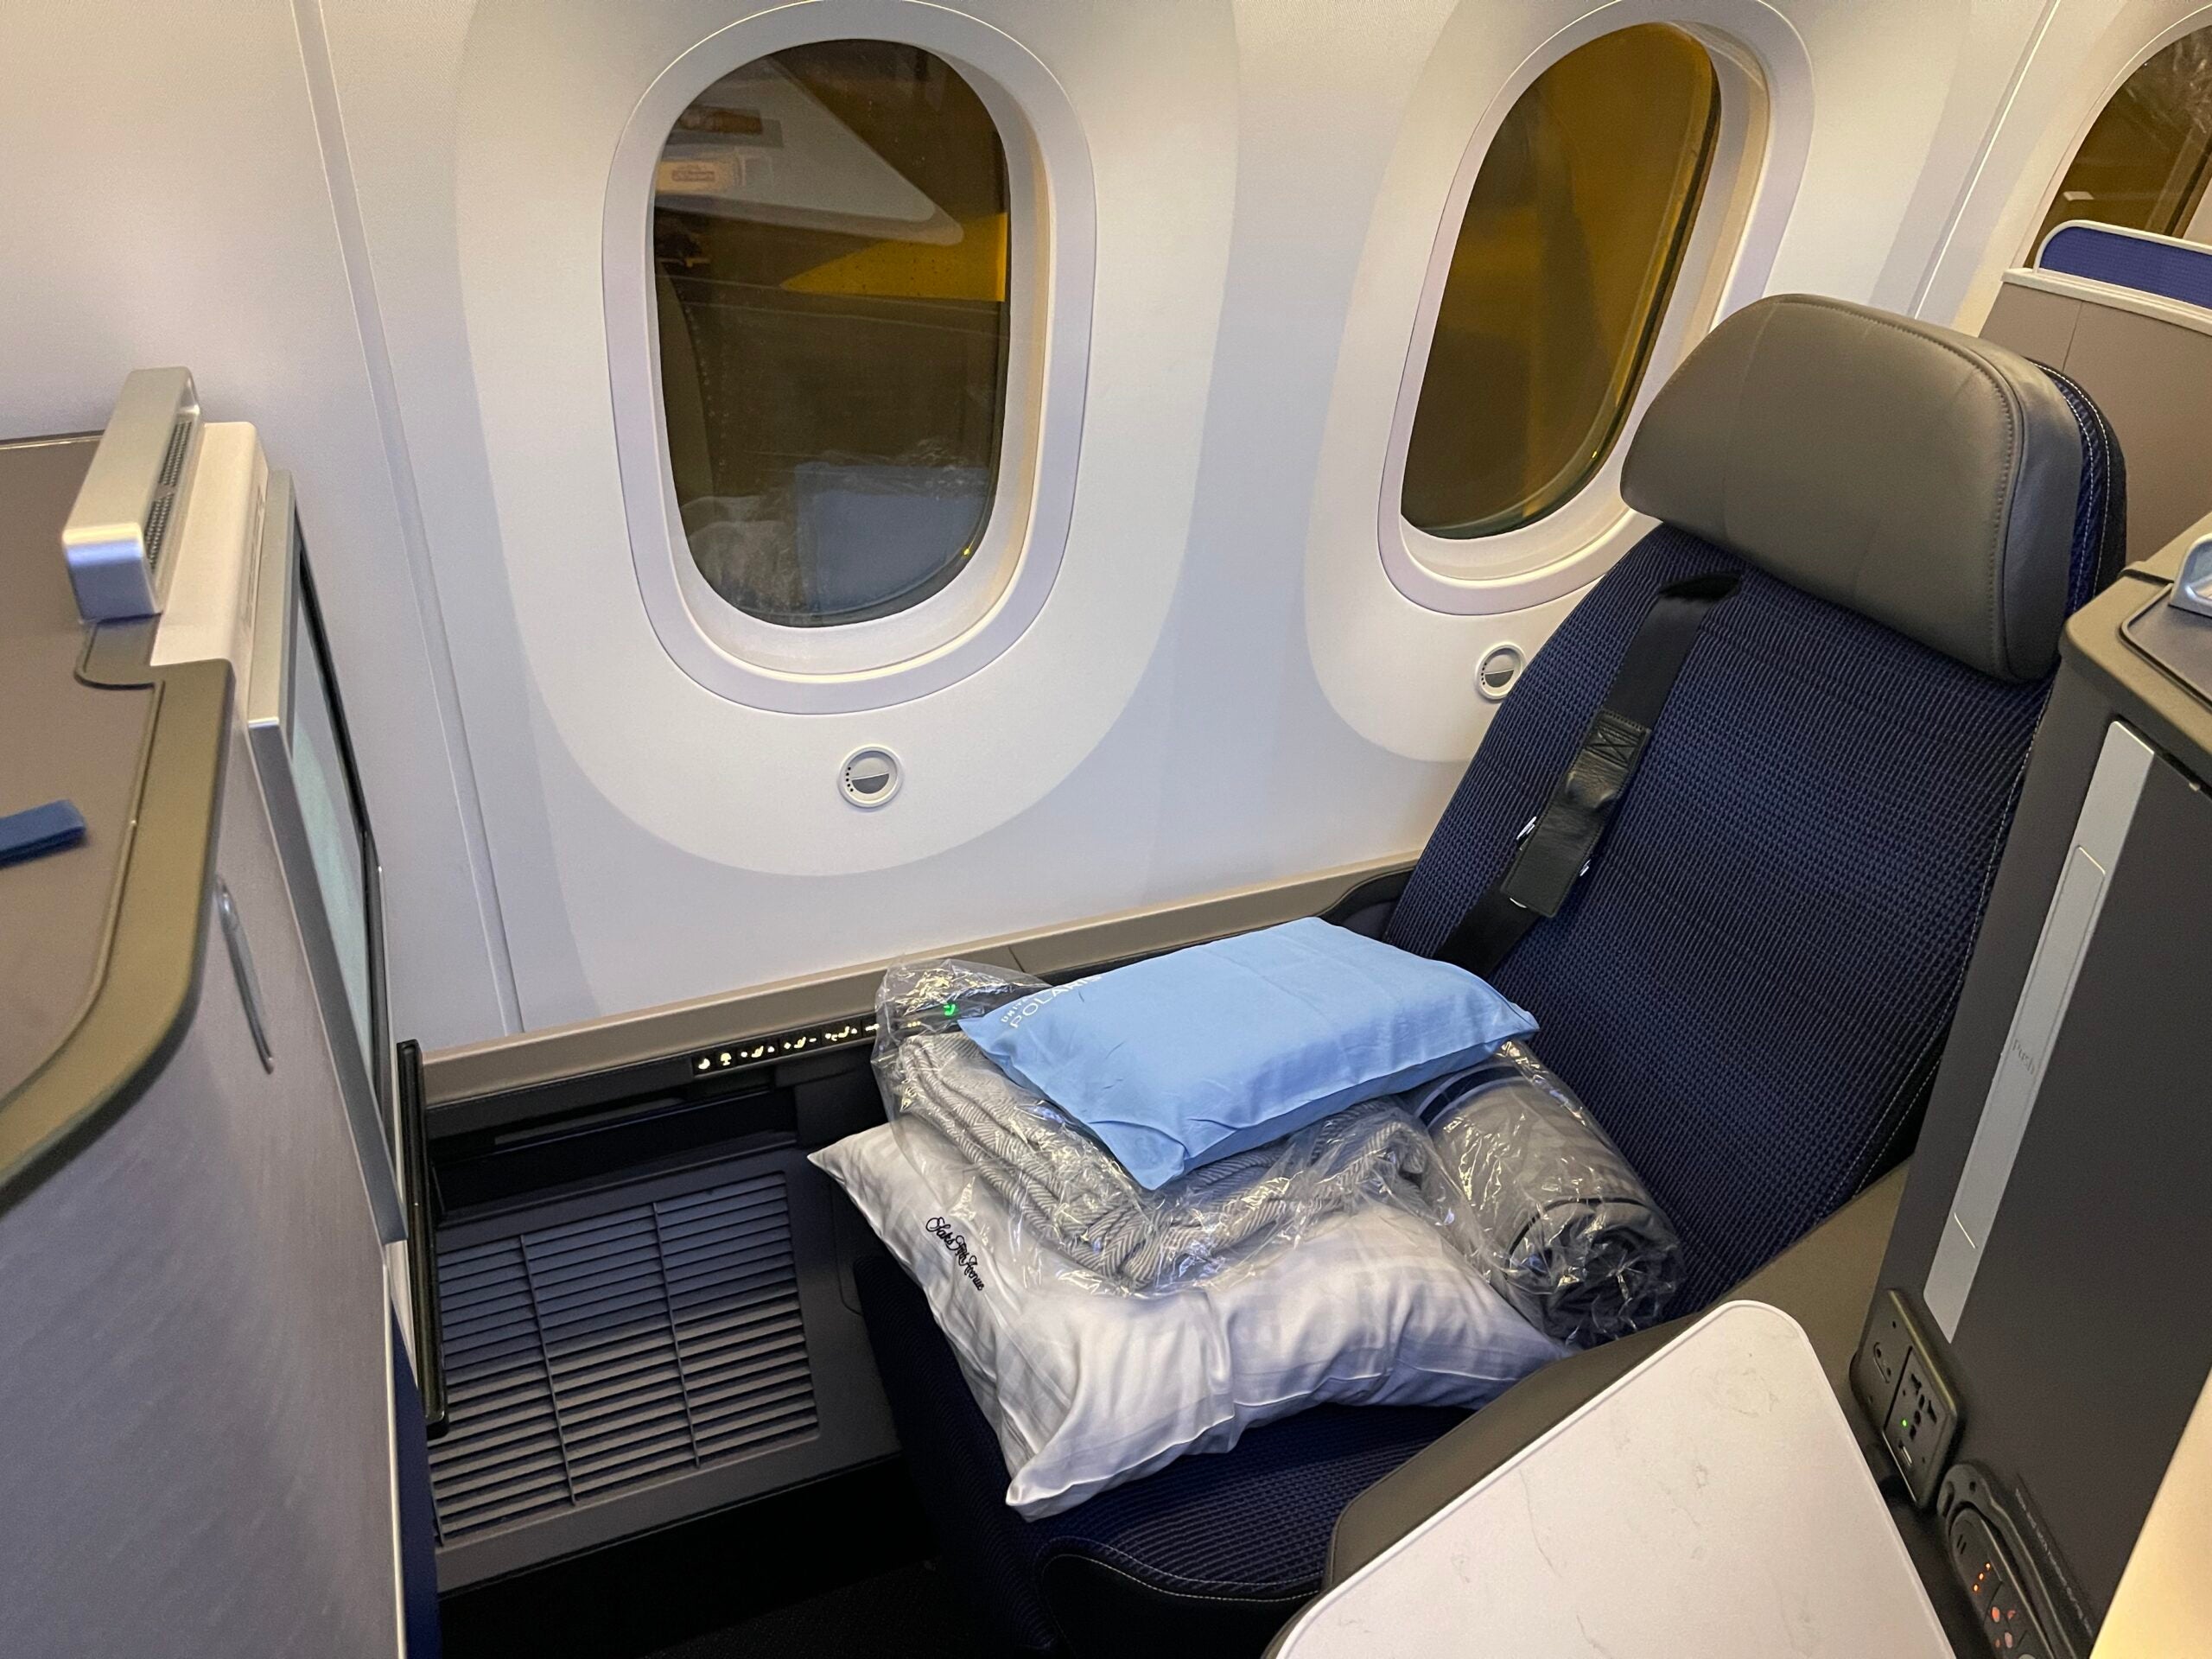 United Airlines Polaris business class on a Boeing 787 9 Dreamliner scaled